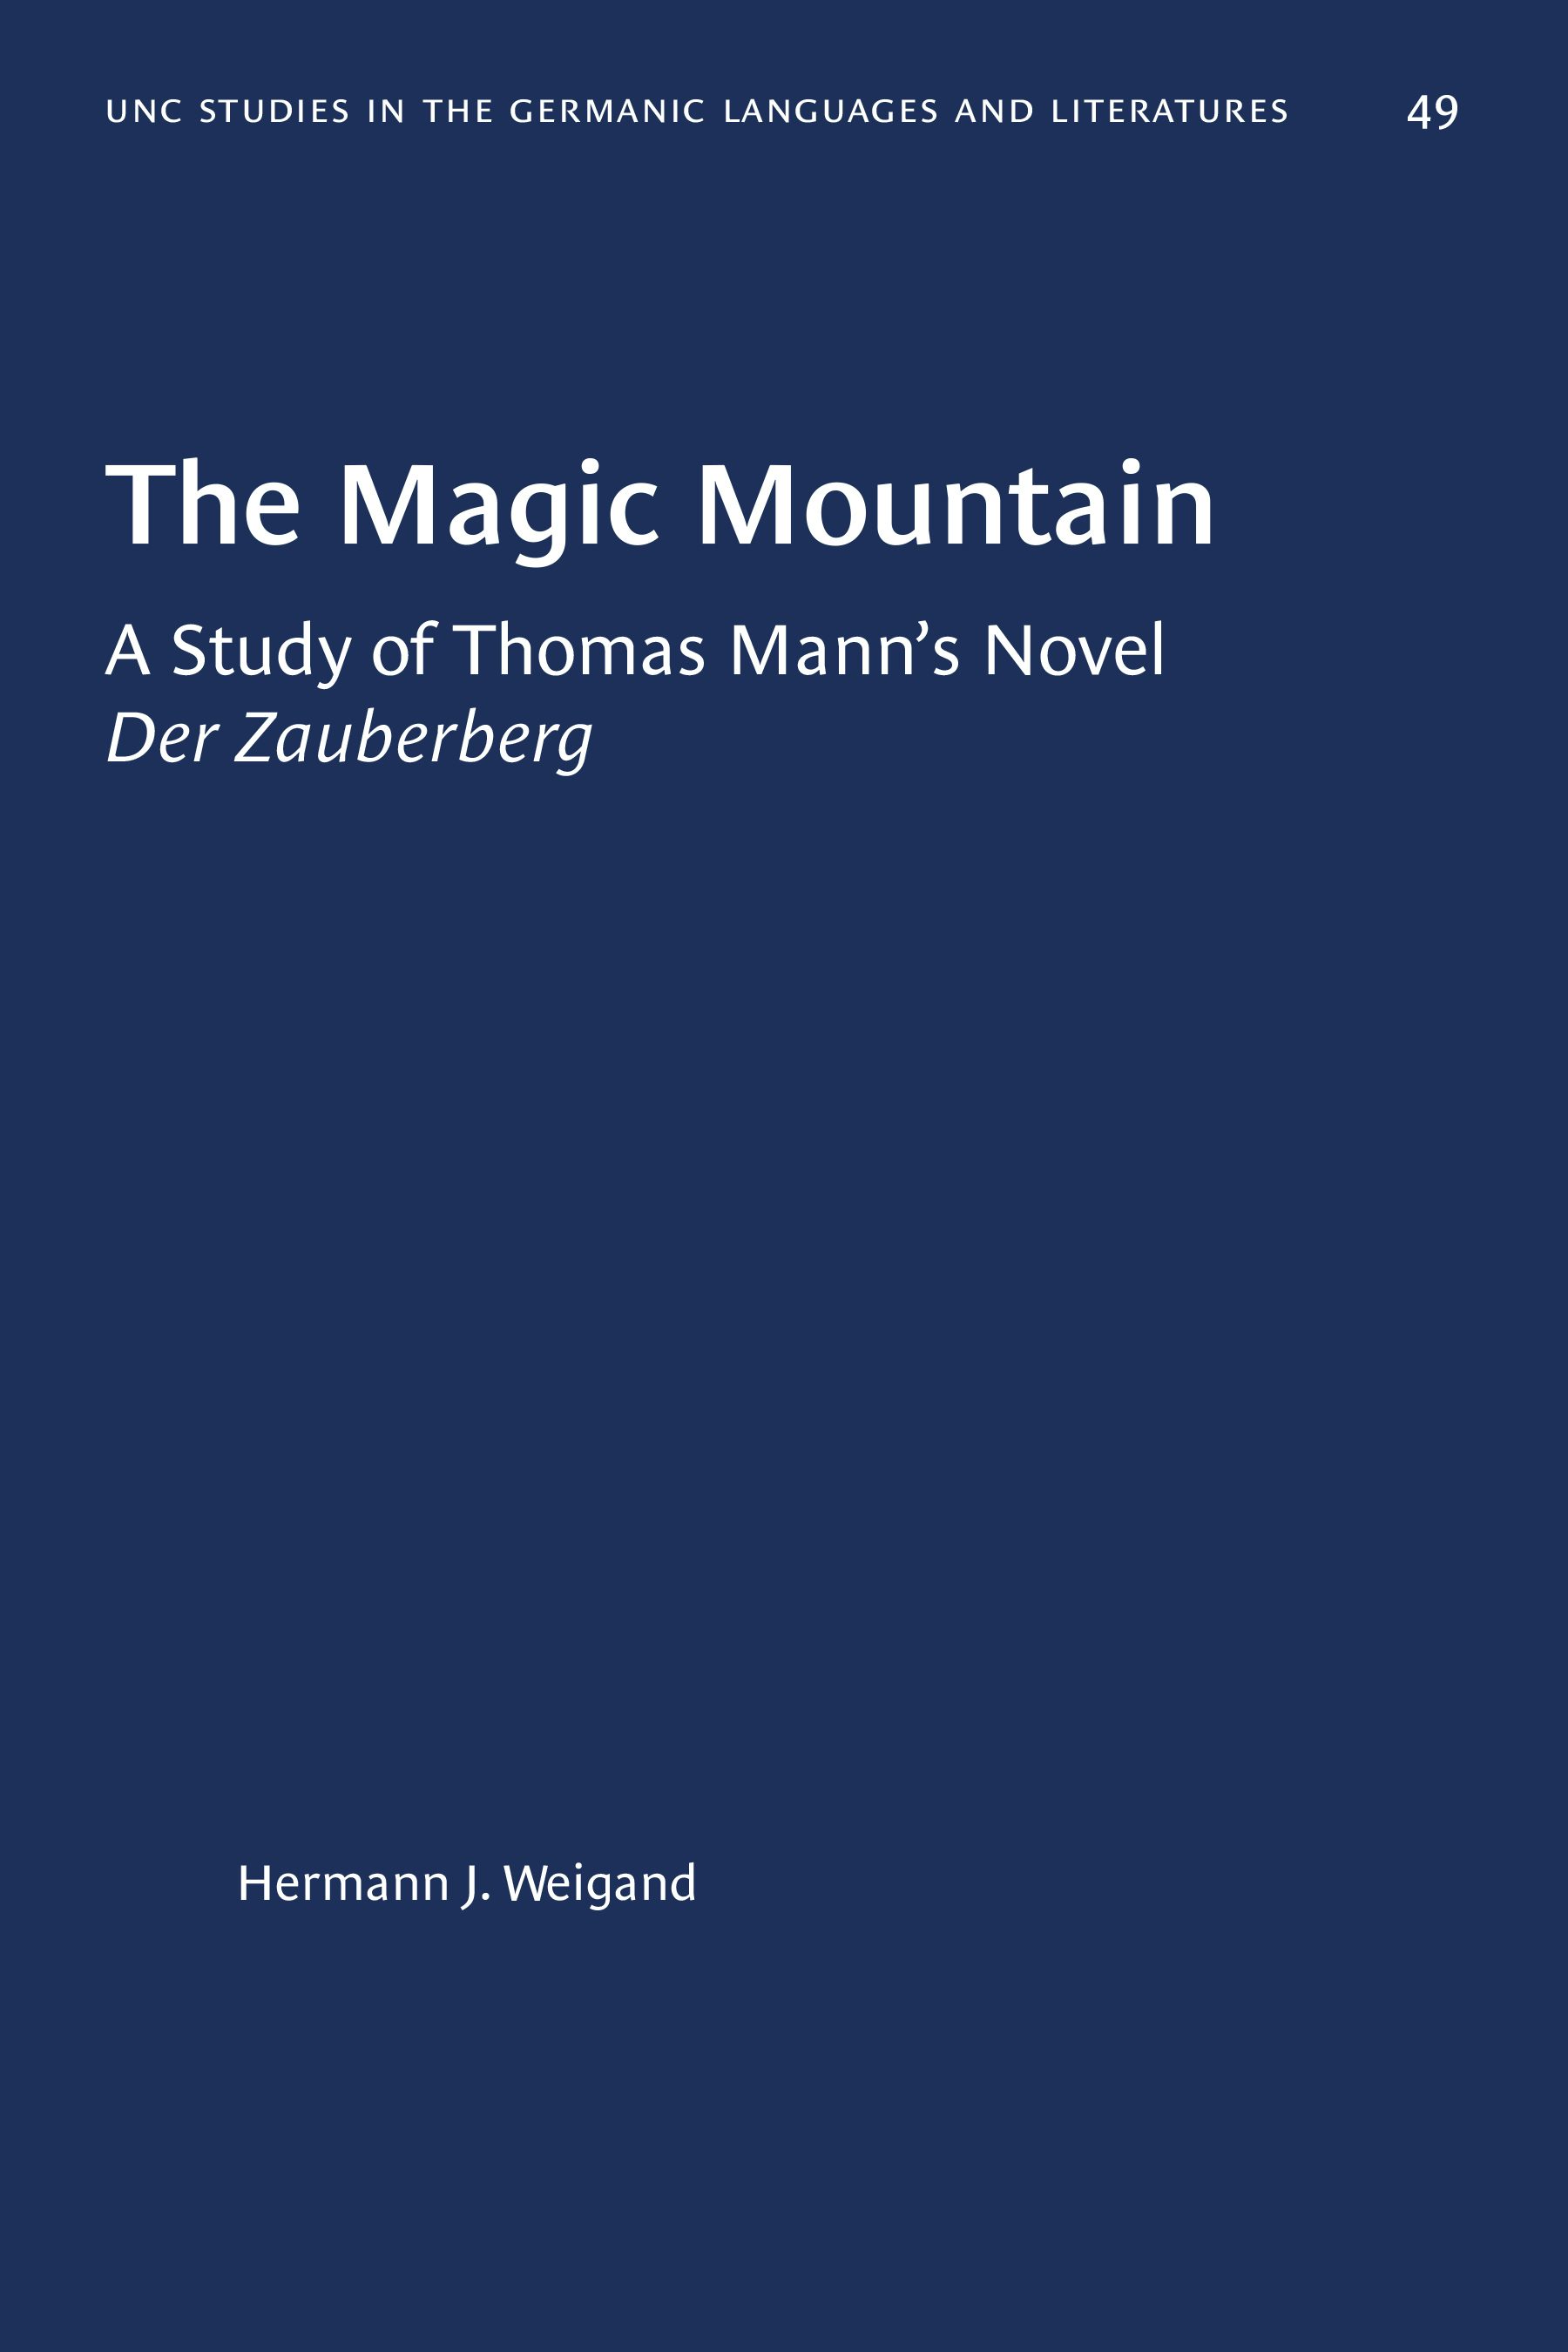 The Magic Mountain | Hermann J. Weigand | University of North 